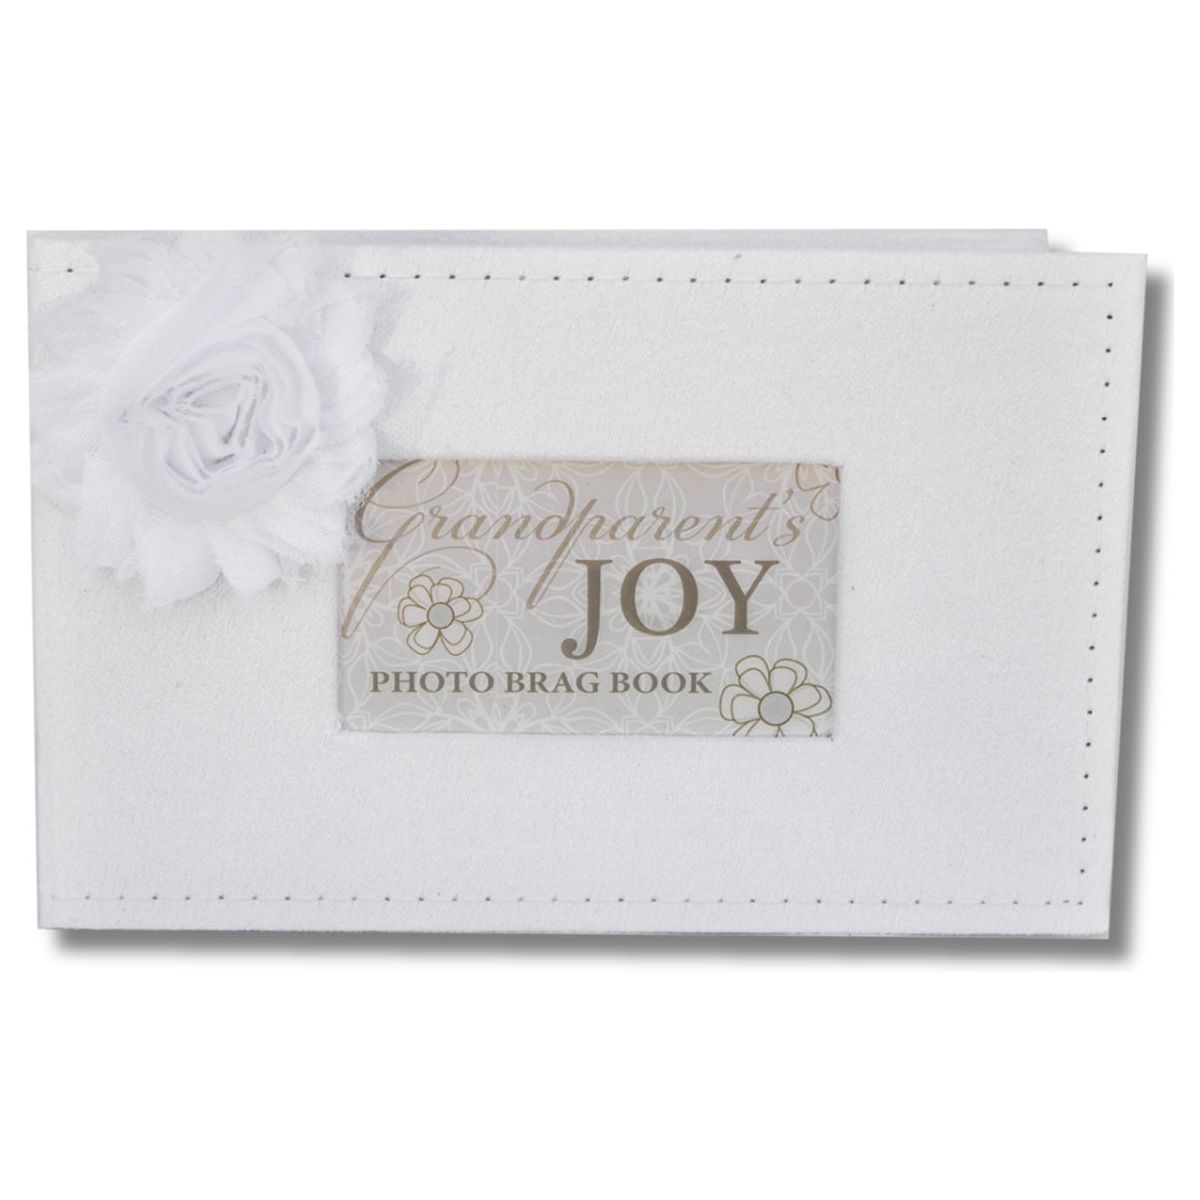 White faux suede photo album with white fabric flower and a window with sentiment artwork showing.